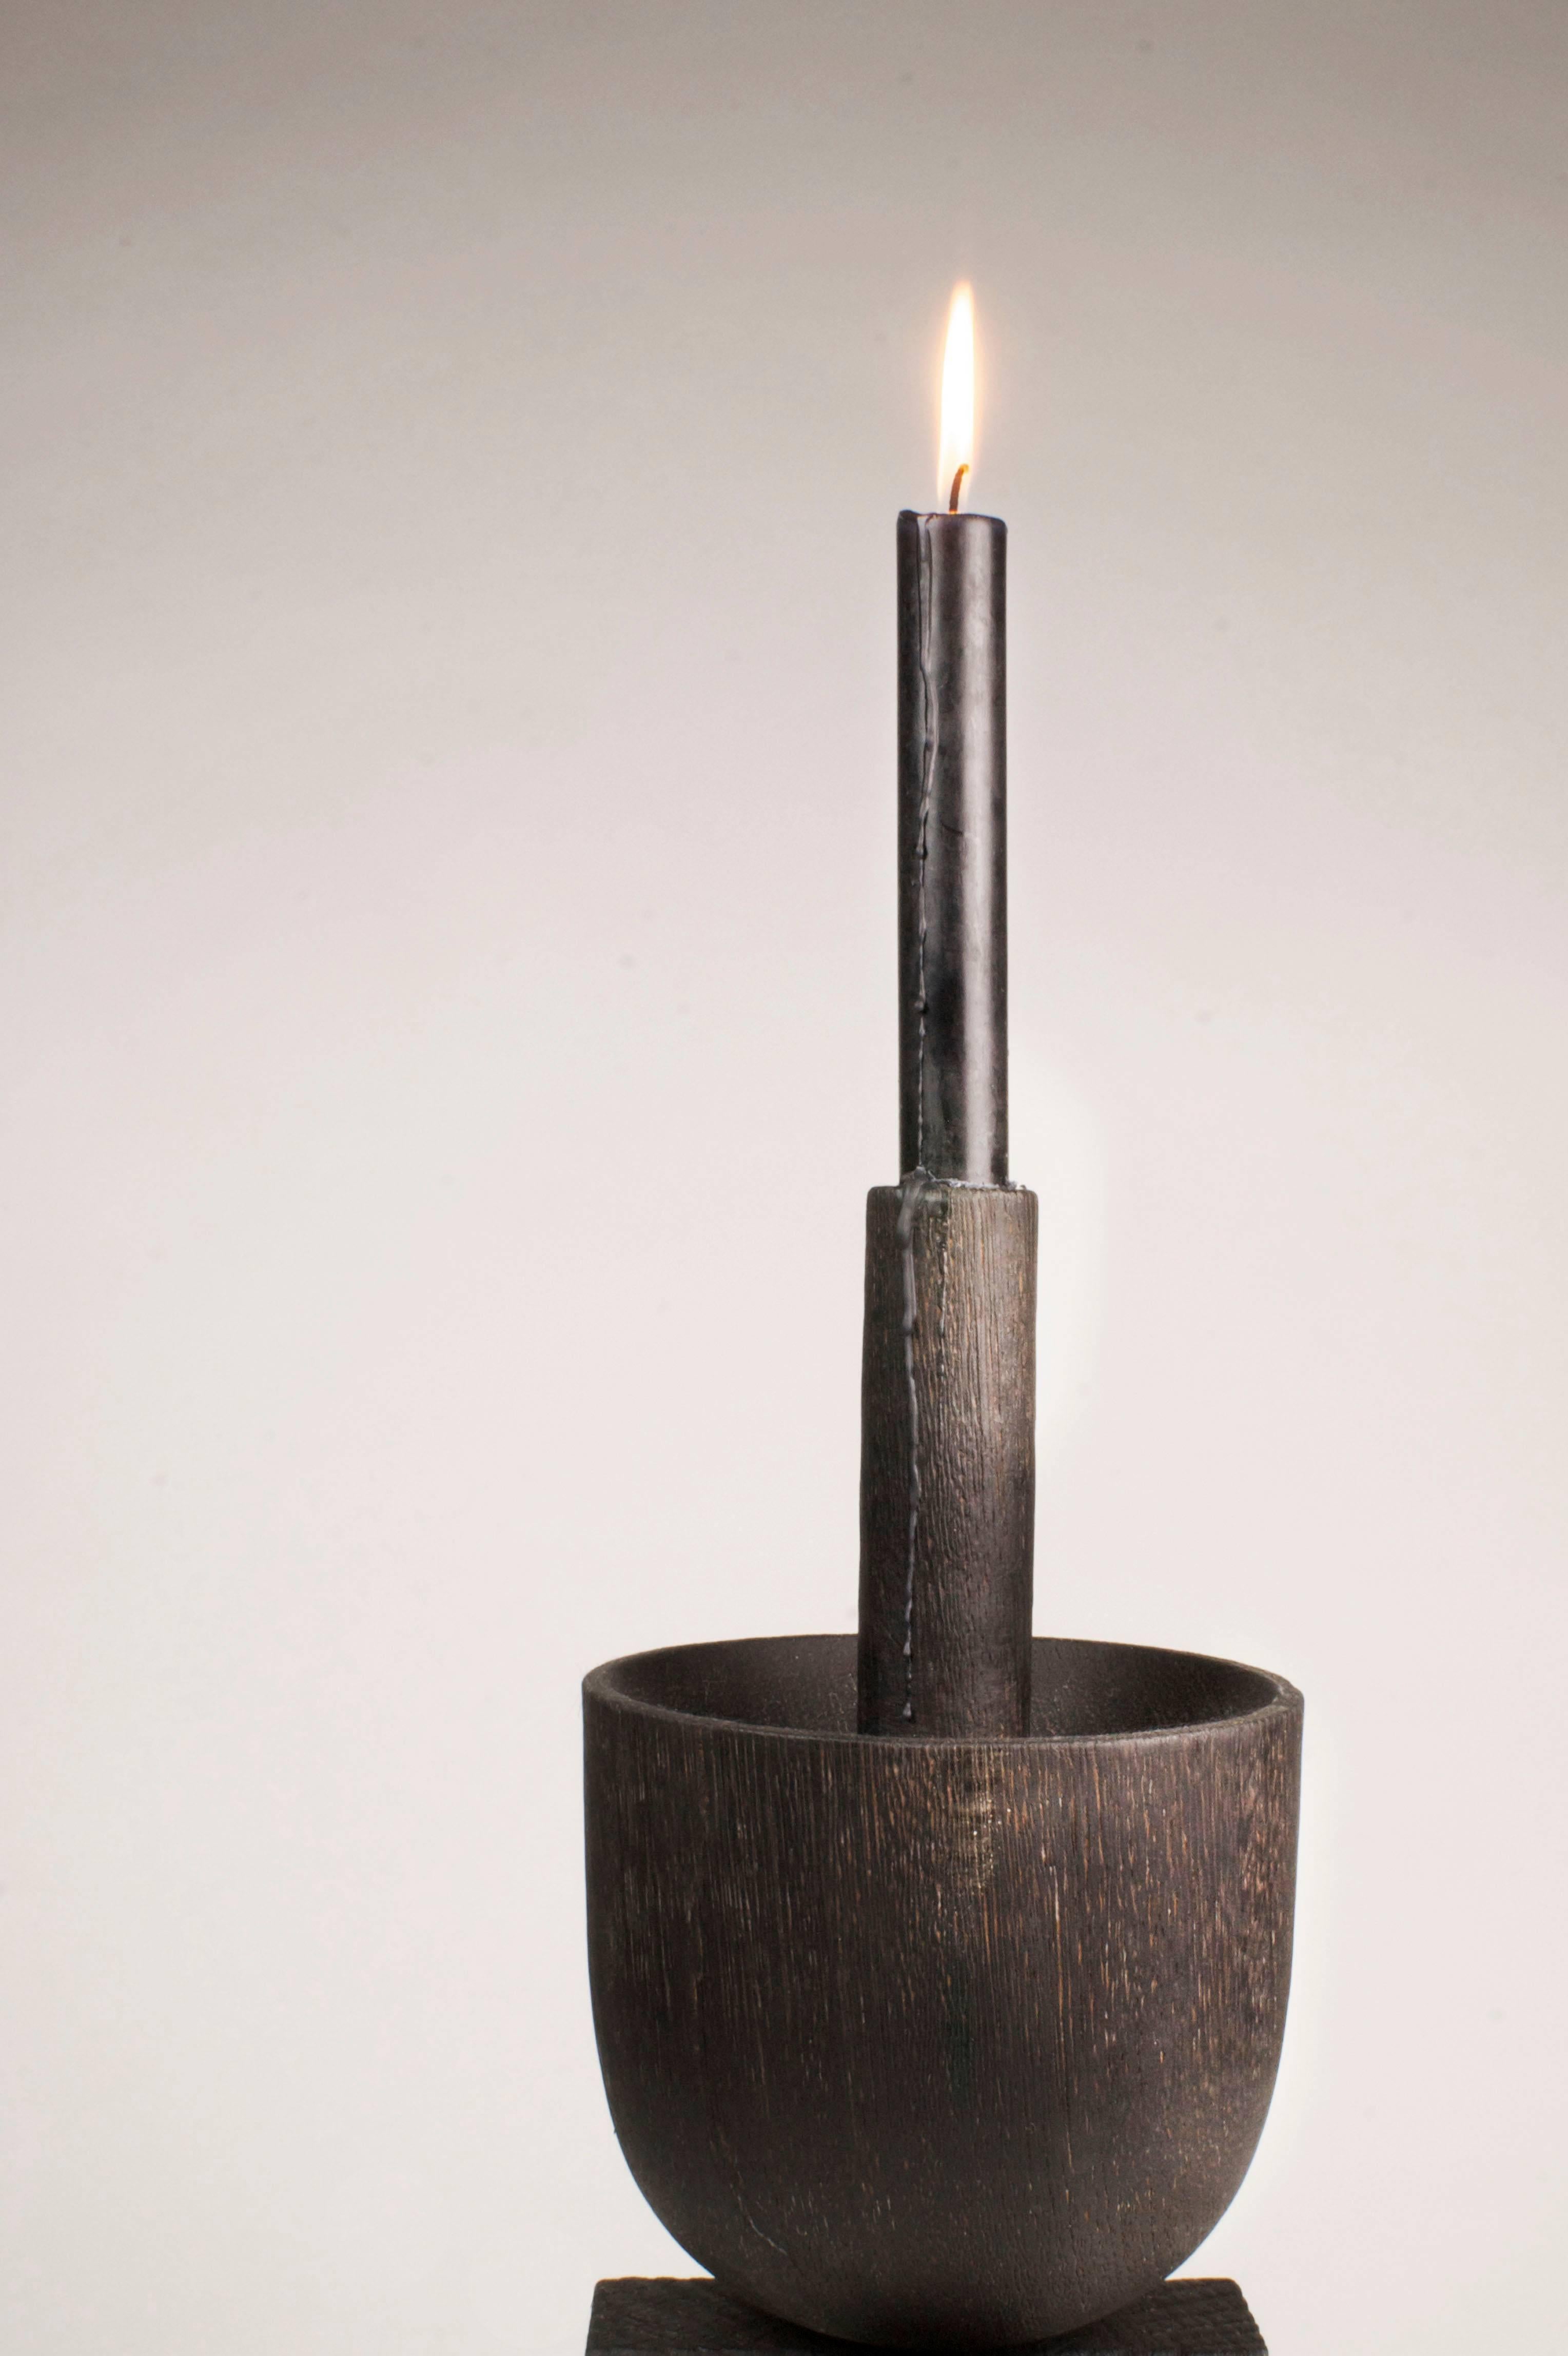 Goblet light
Candleholders
Measures: 50 cm H x 15 cm W - 19.7” H x 6” W
Iroko wood and oak
Signed by Arno Declercq

Arno Declercq
Belgian designer and art dealer who makes bespoke objects with passion for design, atmosphere, history and